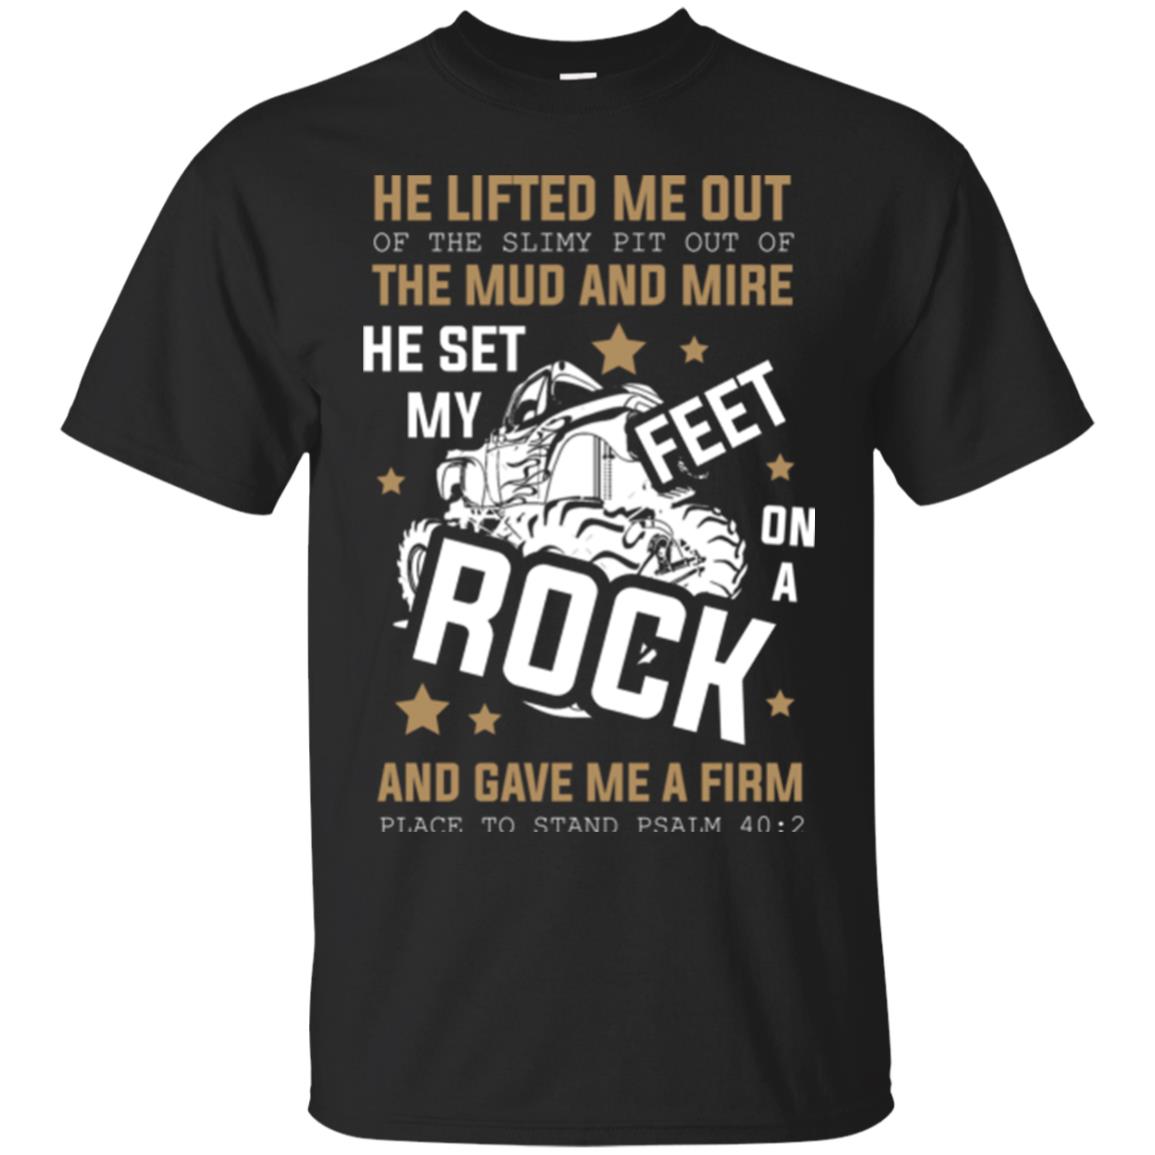 Christian T-shirt He Lifted Me Out Of The Slimy Pit Out Of The Mud And